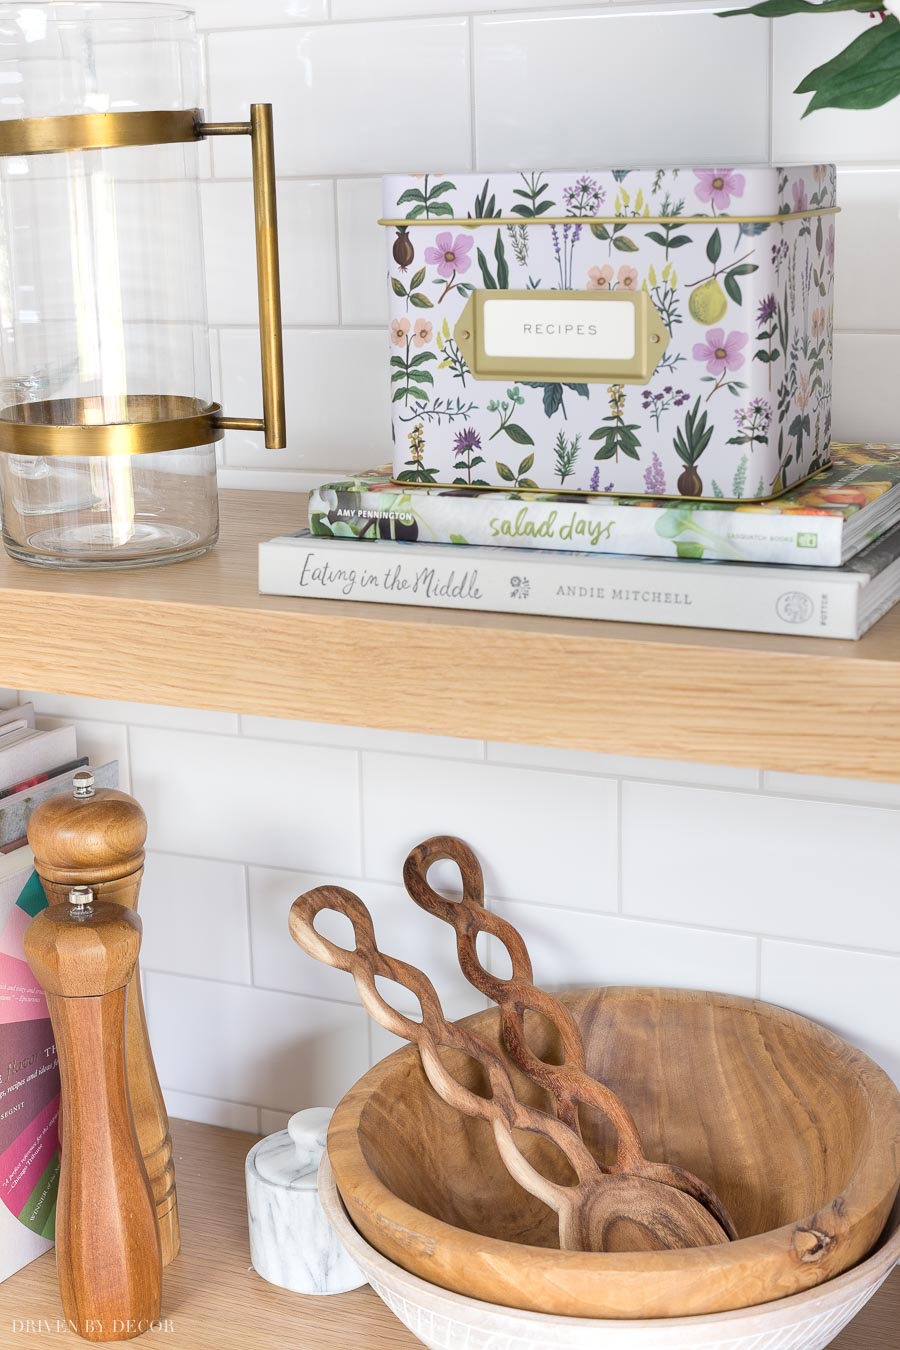 I love open kitchen shelving - these are a few of the accessories that I have on mine!